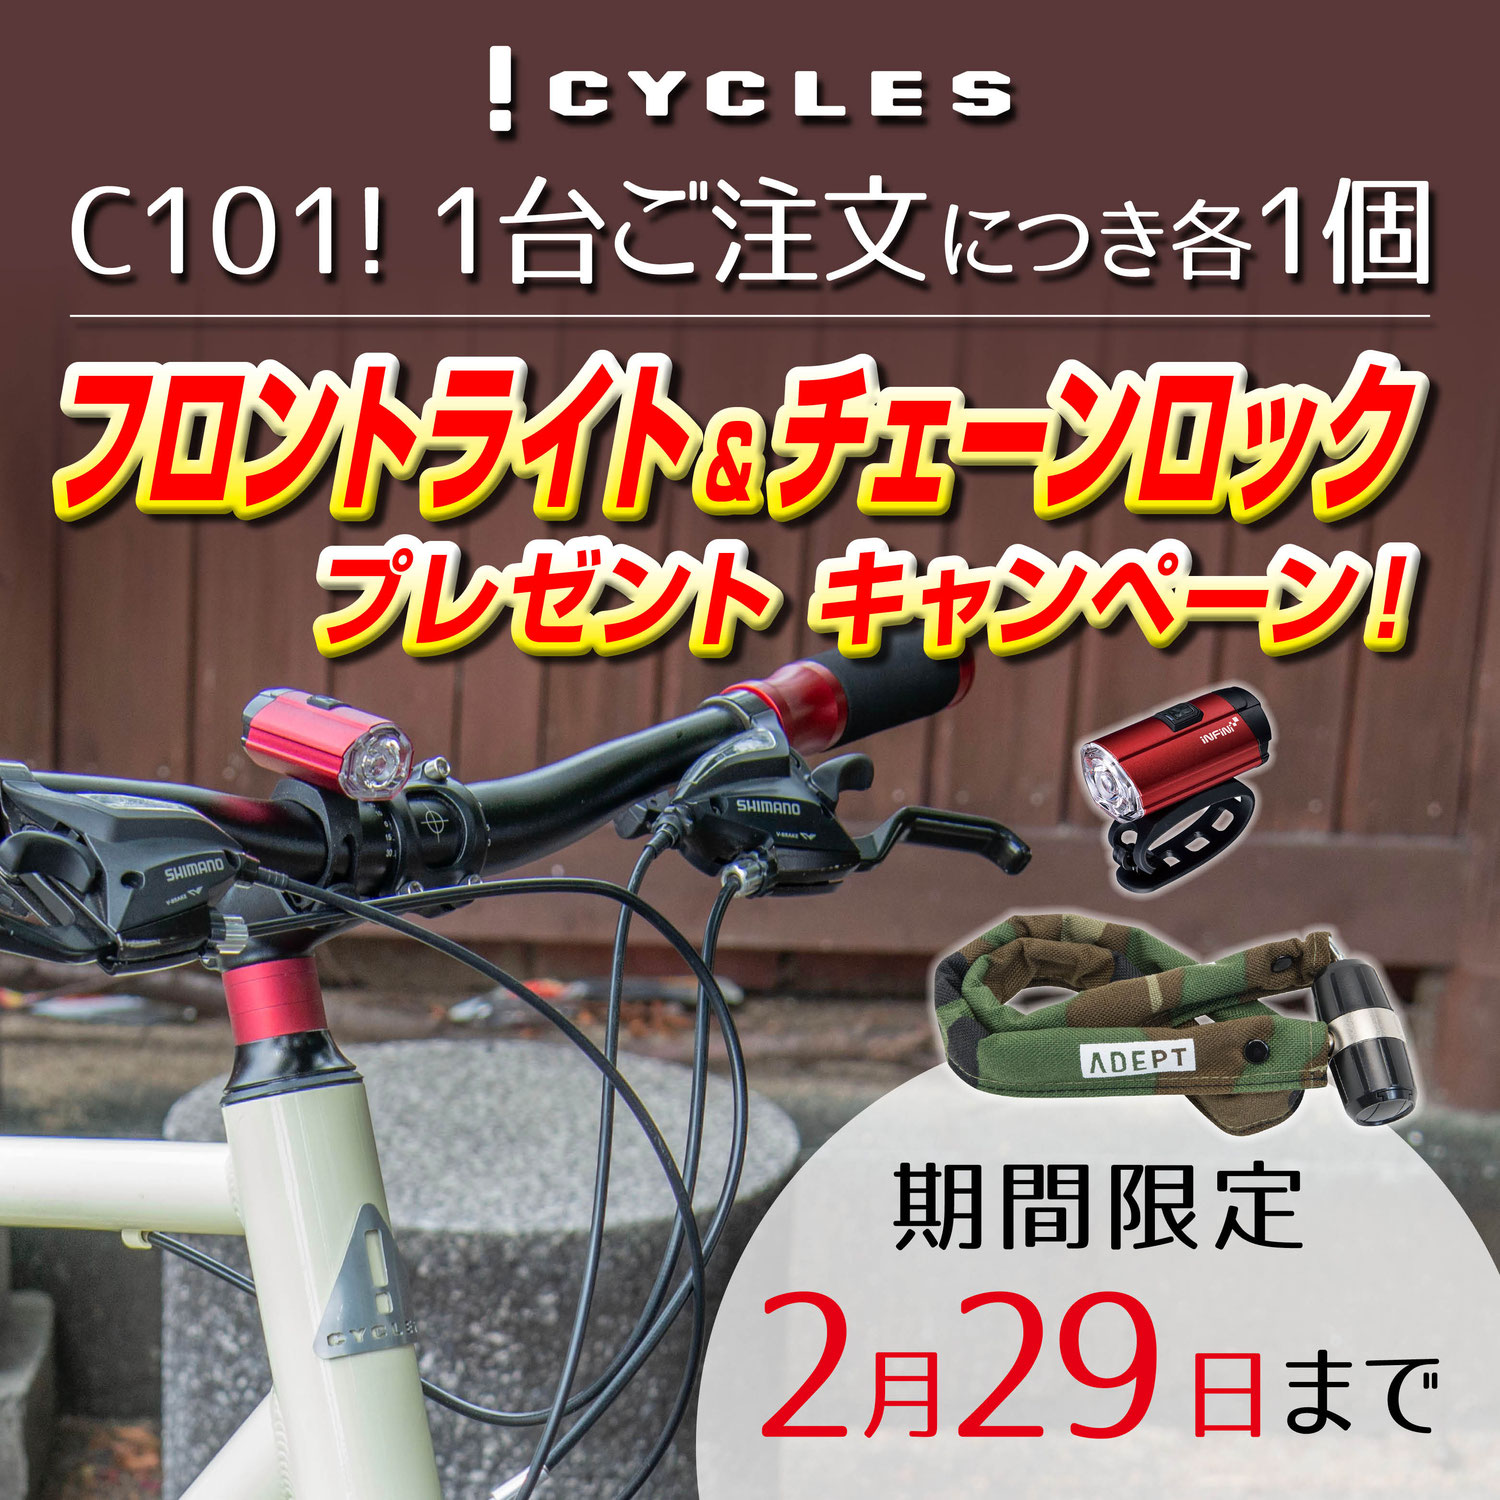 iCYCLES　ライト、チェーンロックプレゼントキャンペーン